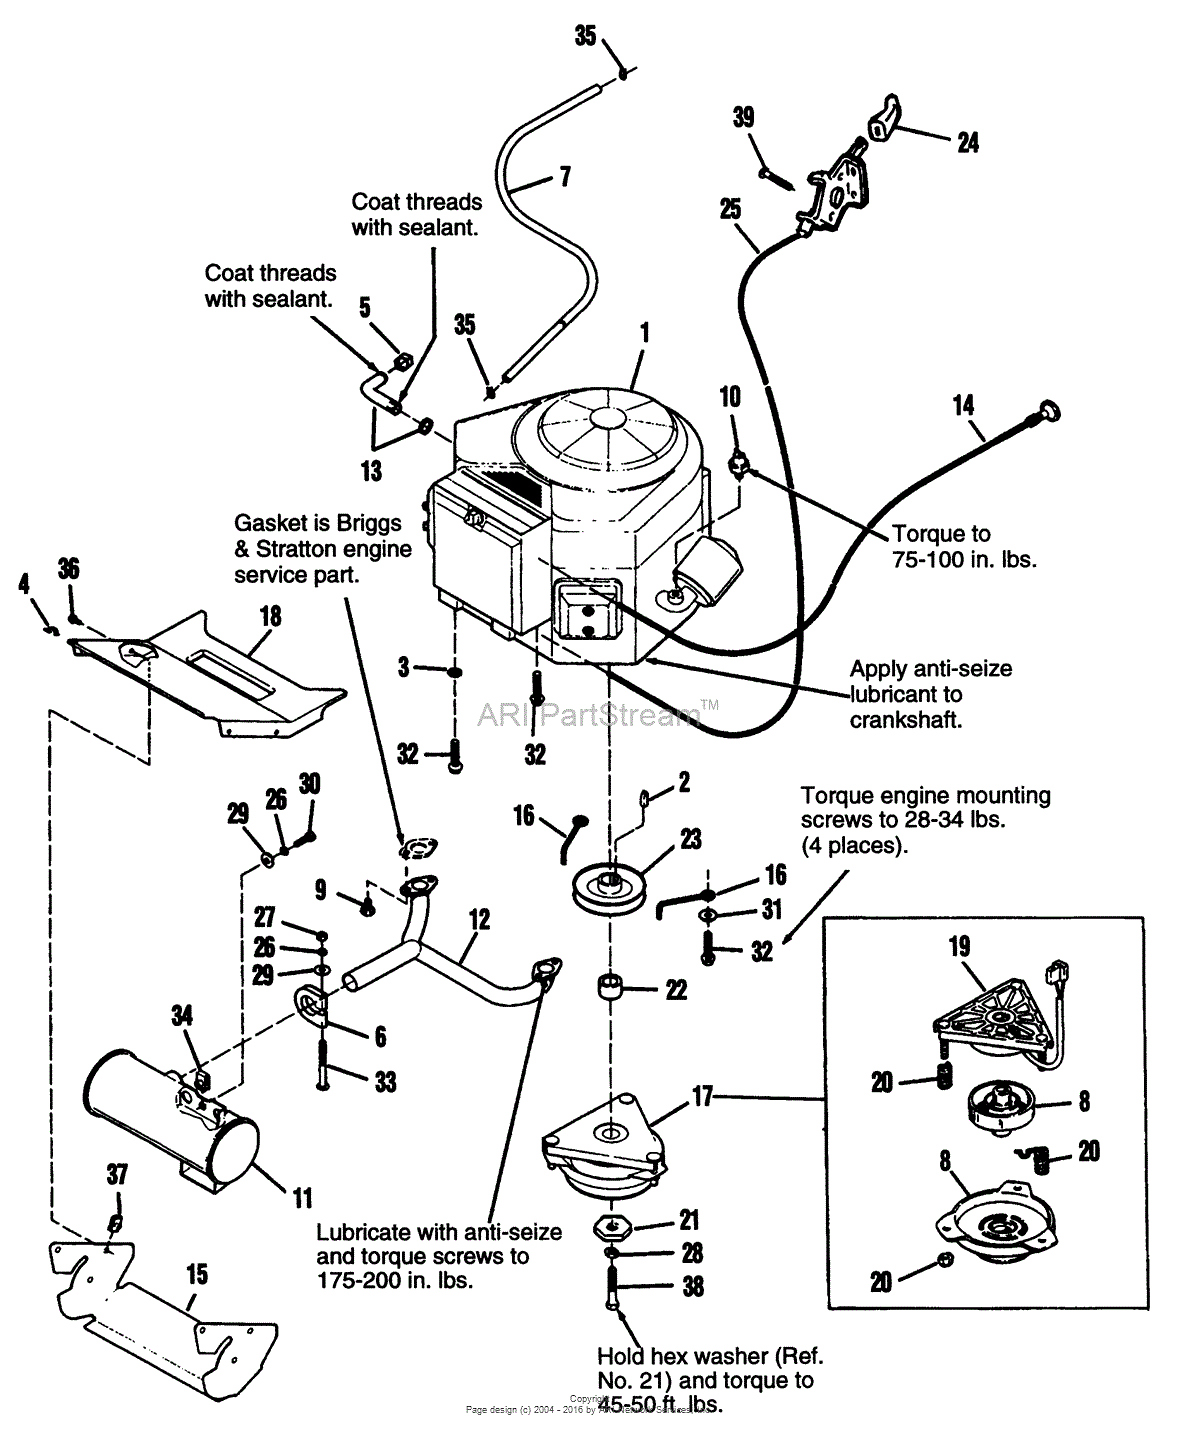 18 Hp Briggs And Stratton Engine Diagram 2007 Tacoma Fuse Box Map Begeboy Wiring Diagram Source